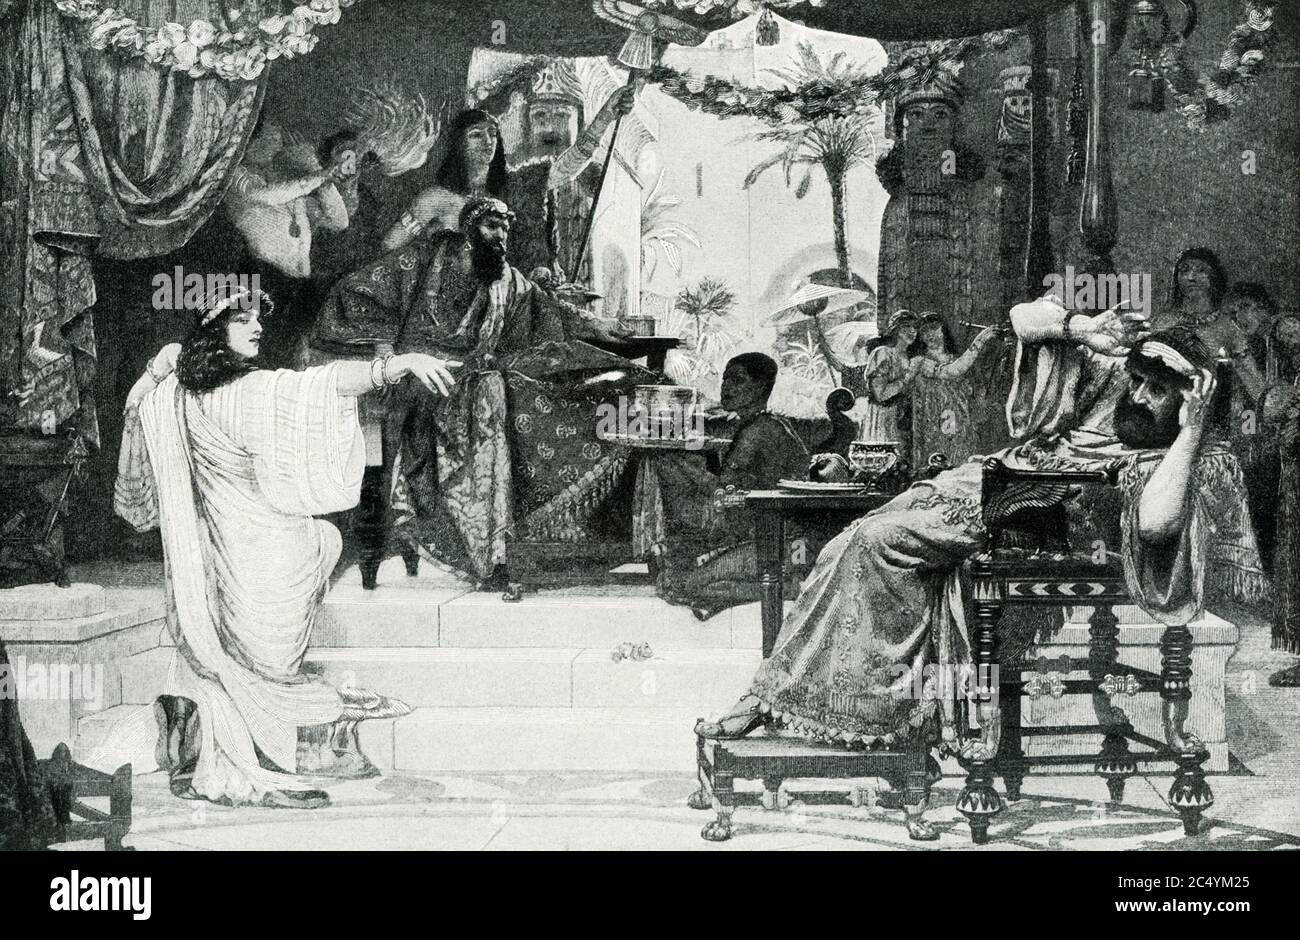 This early 1900s illustrations shows esther before Athasuerus. The scene is from the Book of Esther and depicts Esther, the Jewish wife of the king Ahasuerus (sometimes named as Xerxes). After the king ordered the execution of all Jewish people in the Persian Empire, Esther went before him, without being summoned, to beg for him to spare her people. This broke court etiquette and Esther risked death in doing so. She ended up fainting before the king. Her action softened the king, and he permitted the Jews to defend themselves against his attack, preventing them from being killed off. Stock Photo